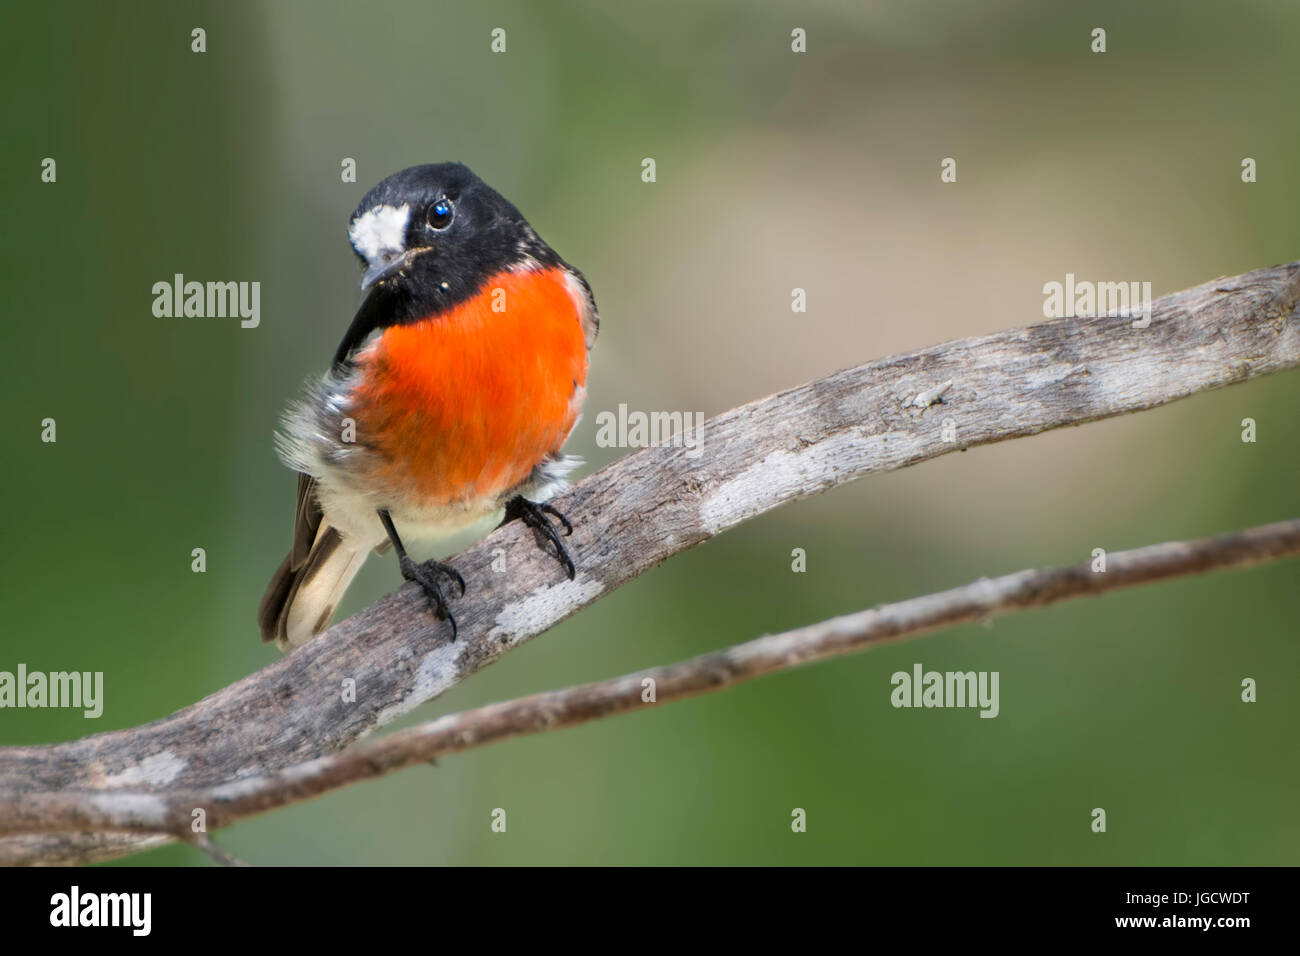 Scarlet Robins (Petroica boodang) perched on a branch, Australia Stock Photo